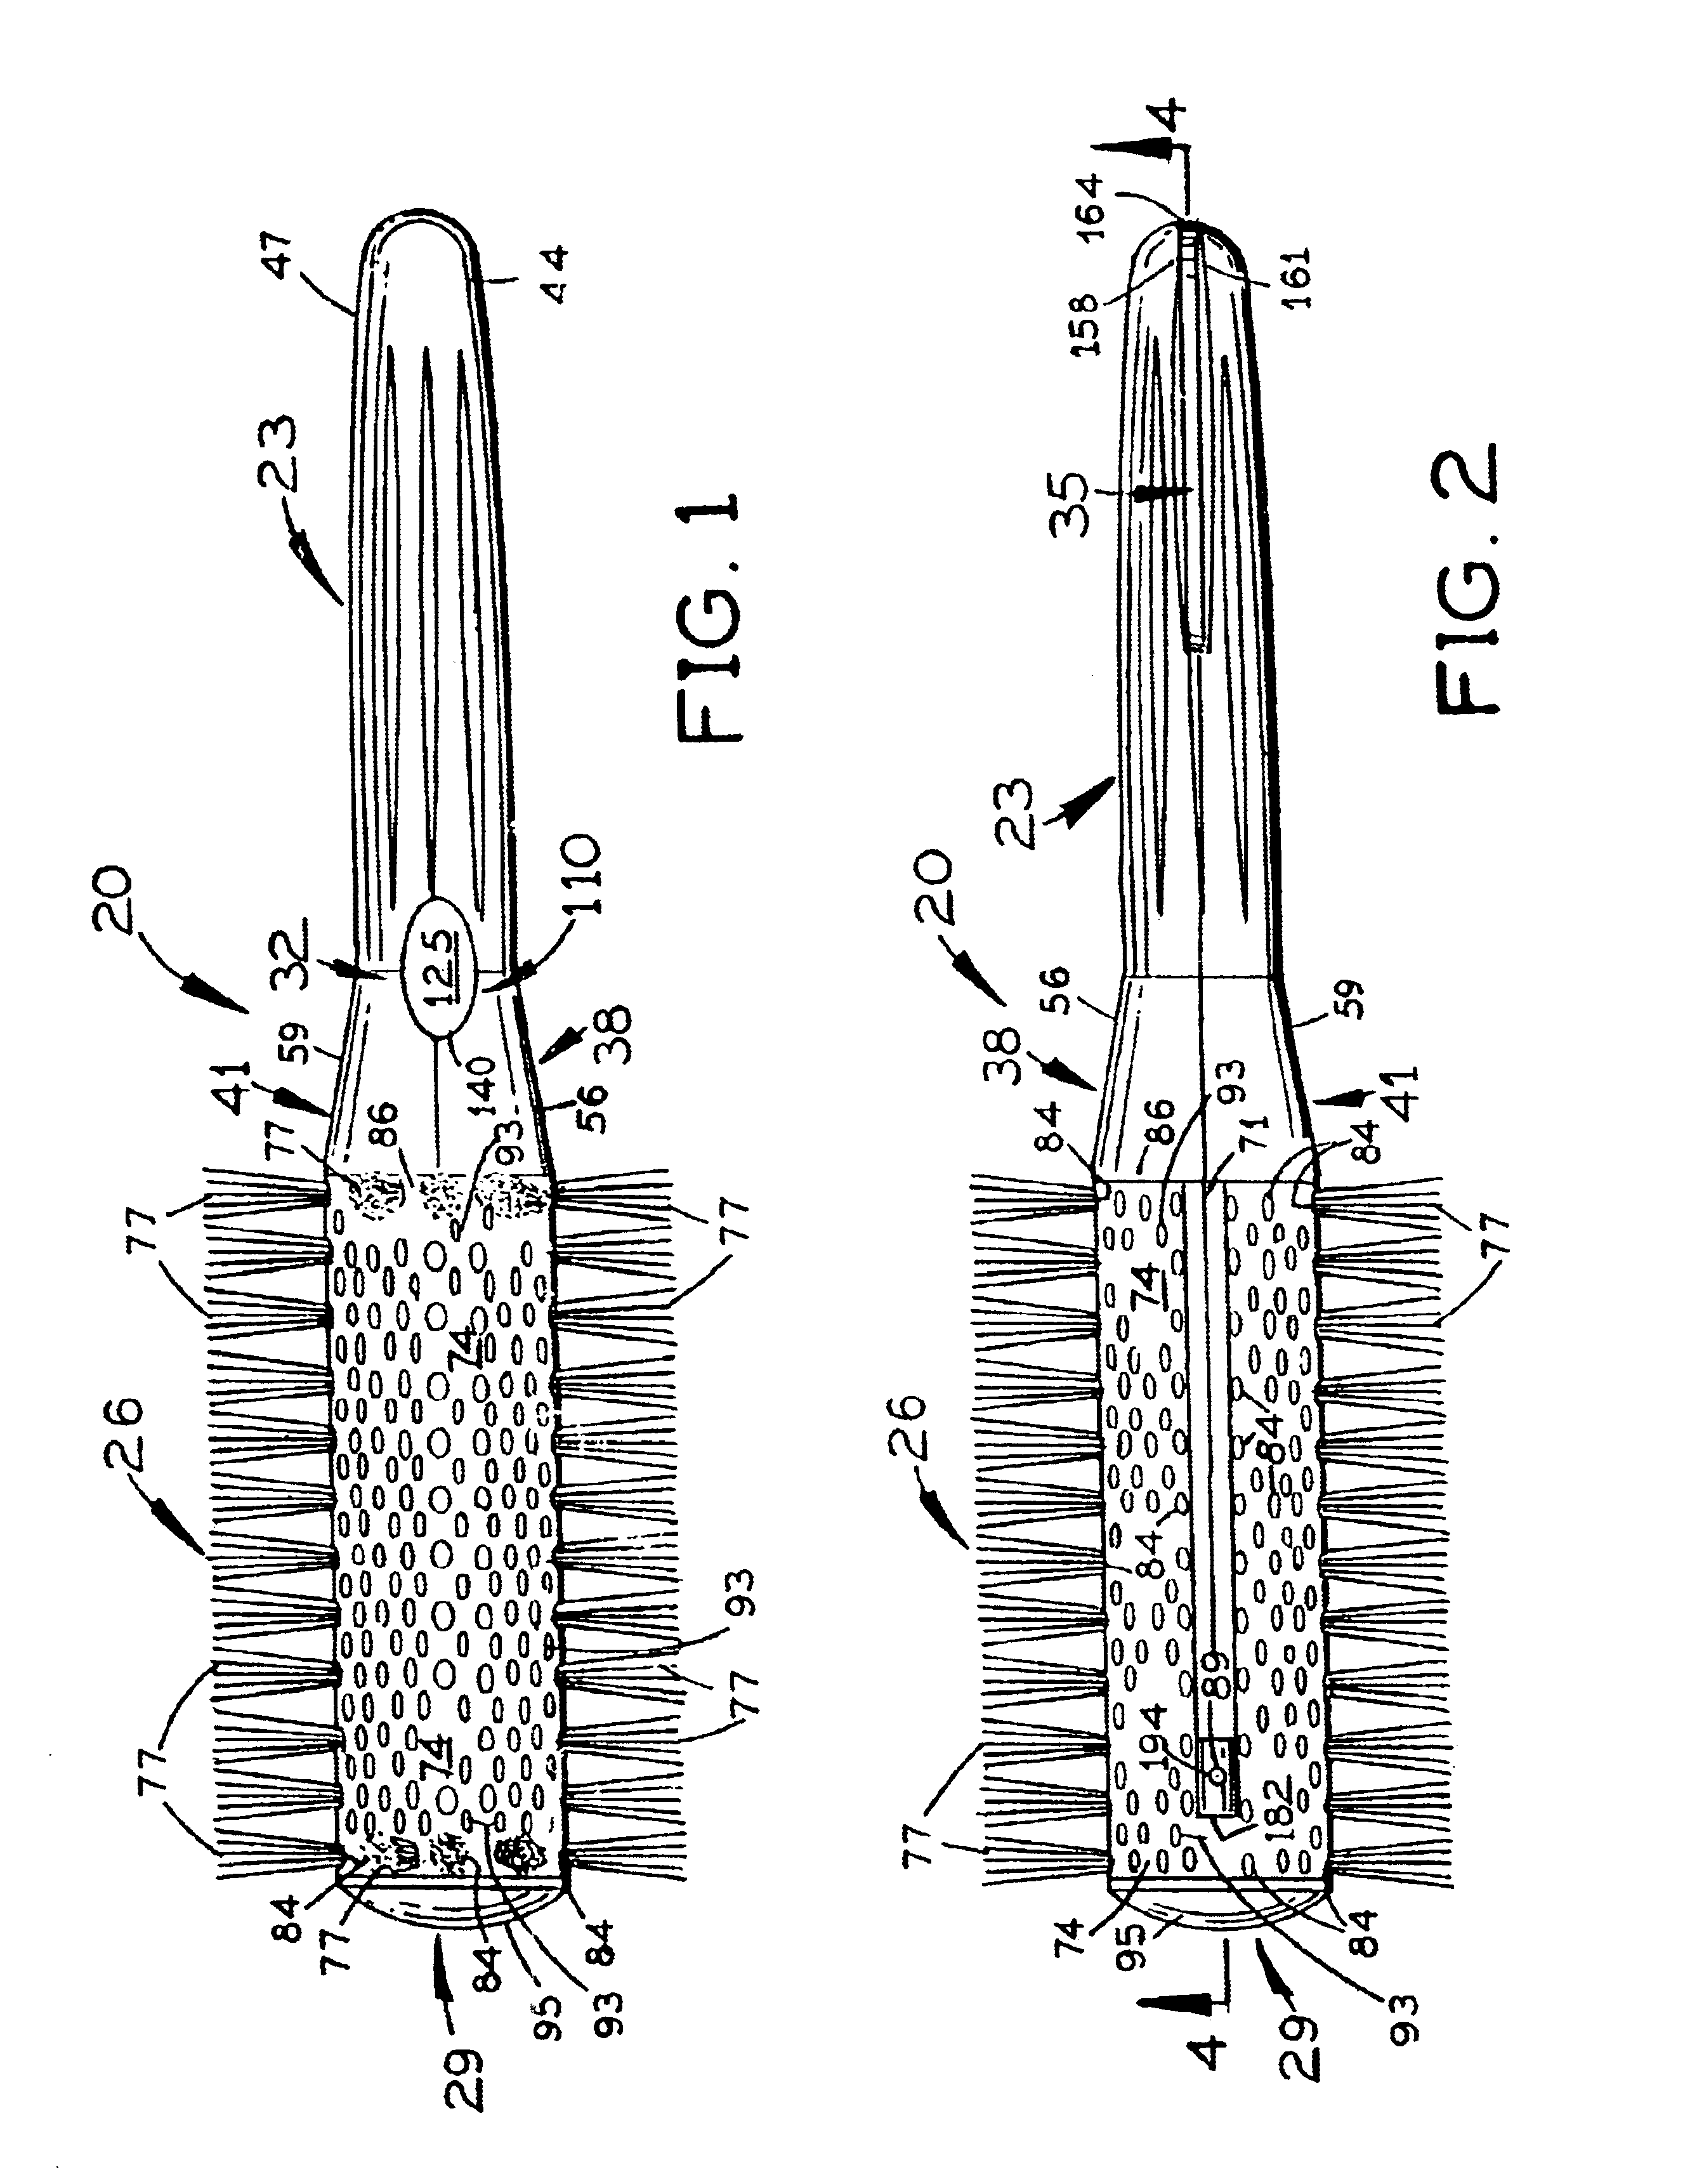 Hair styling brush with integral misting device